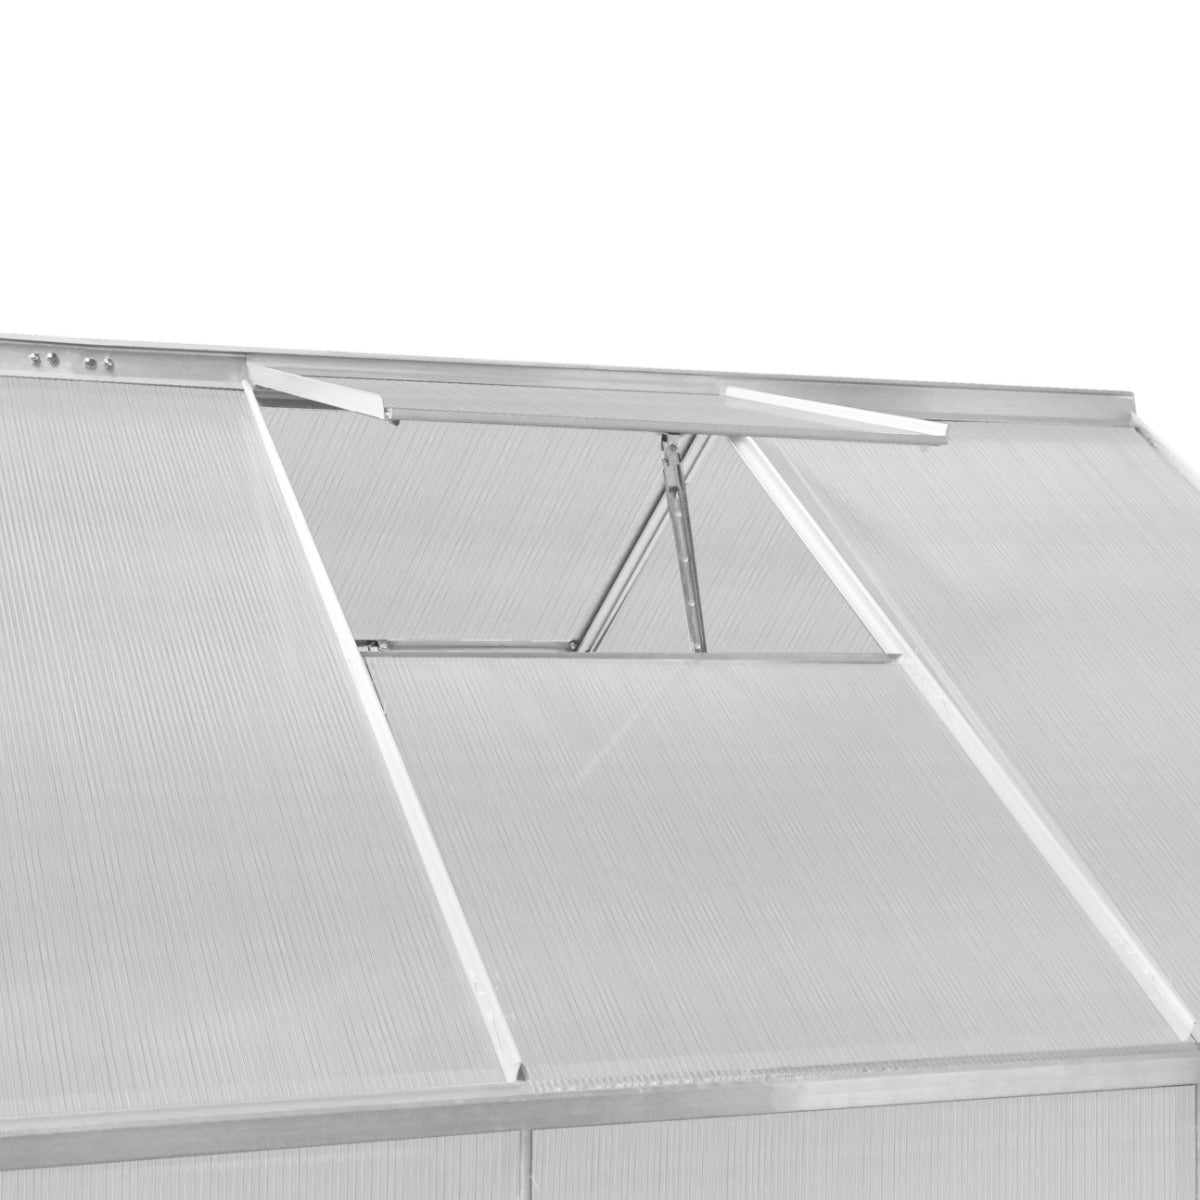 Polycarbonate Greenhouse 6ft x 8ft with Base – Silver